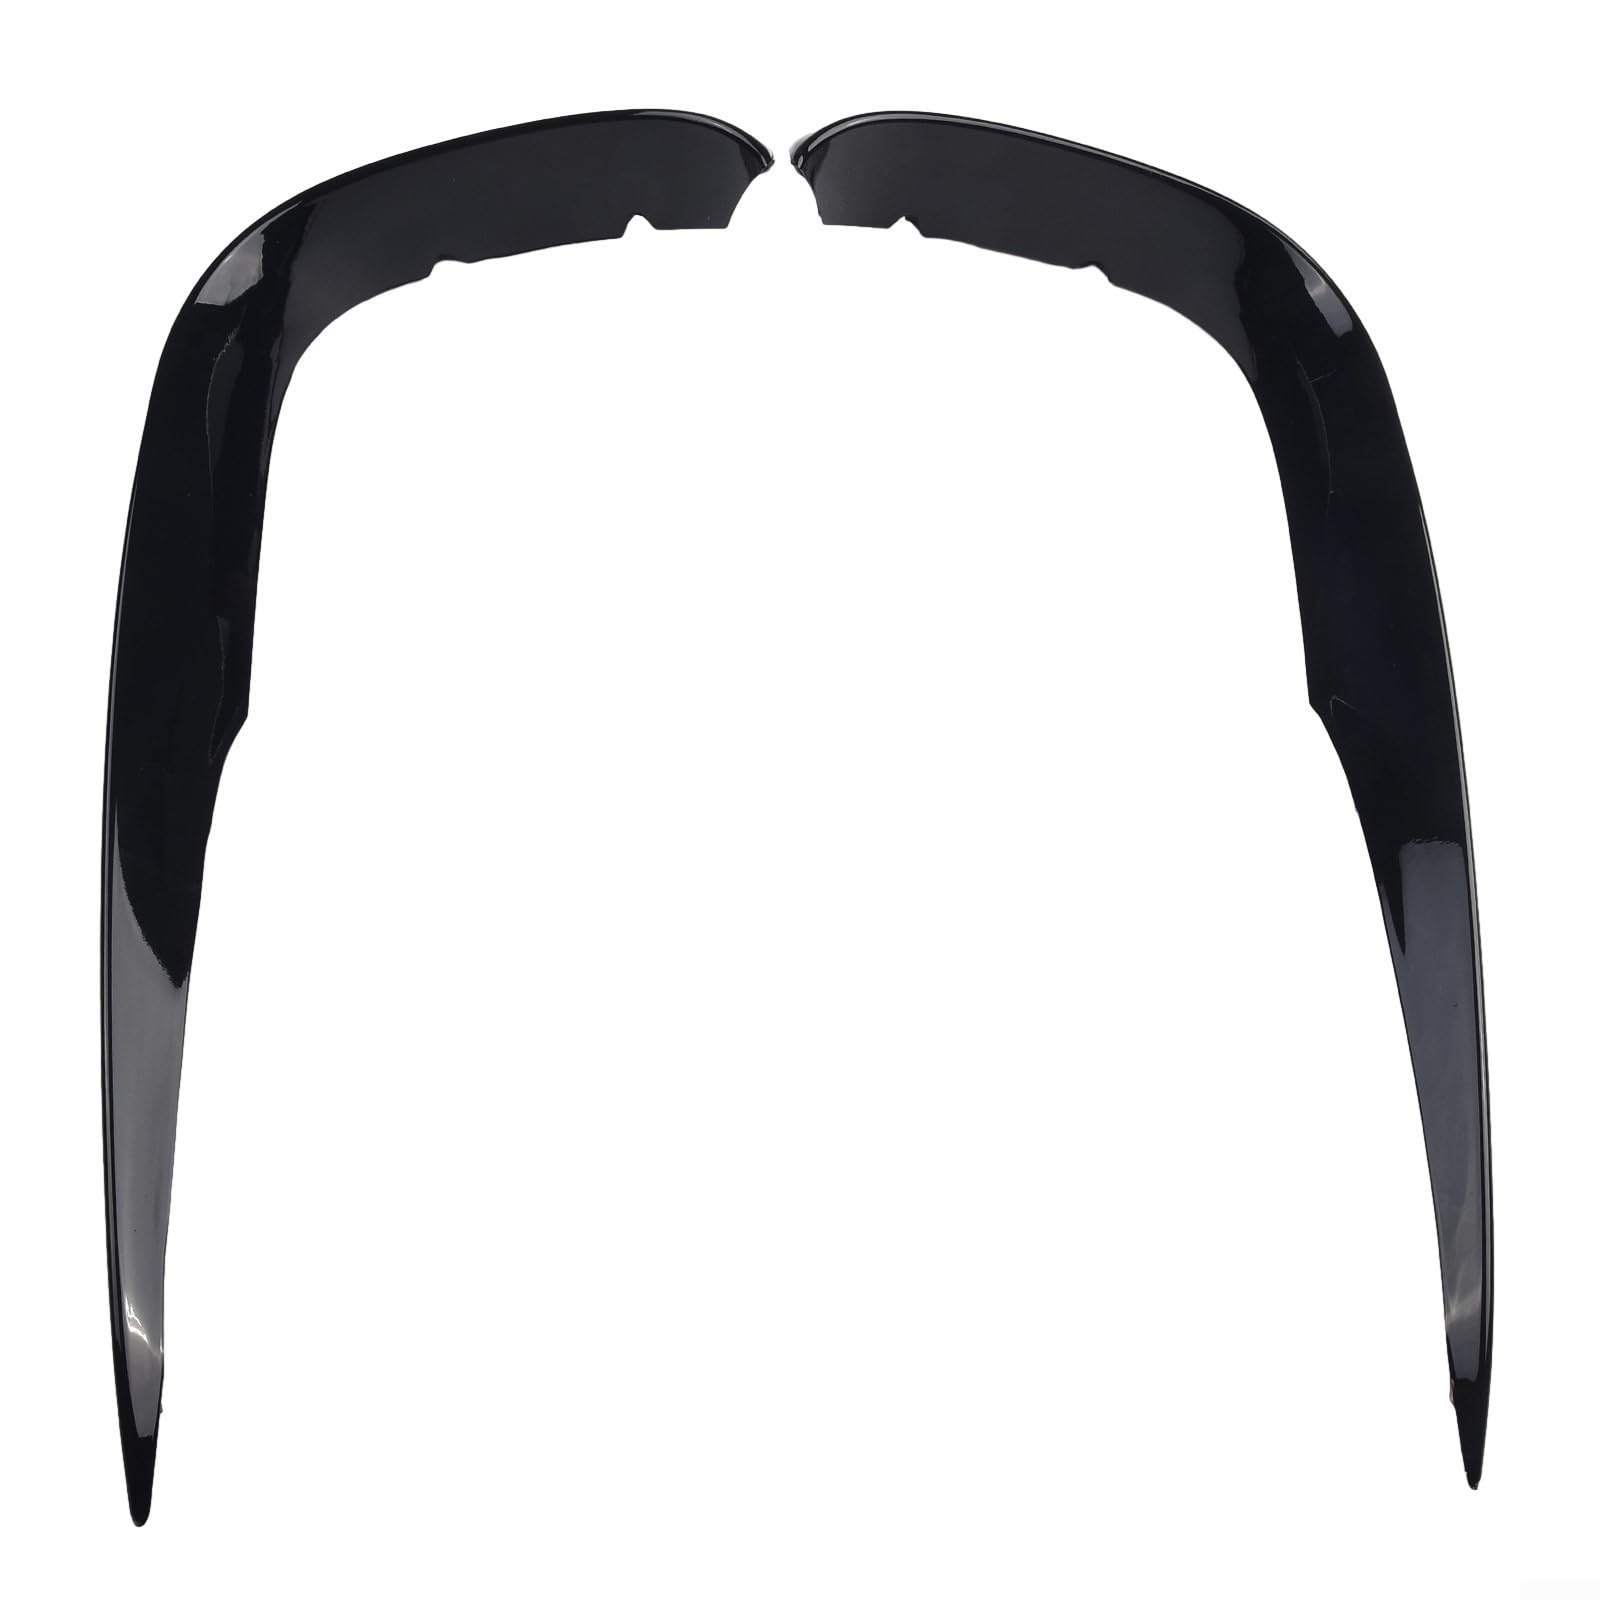 Upgrade Your For E Class W213 with Bumper Lip Splitter Spoiler (Black UP) von RemixAst